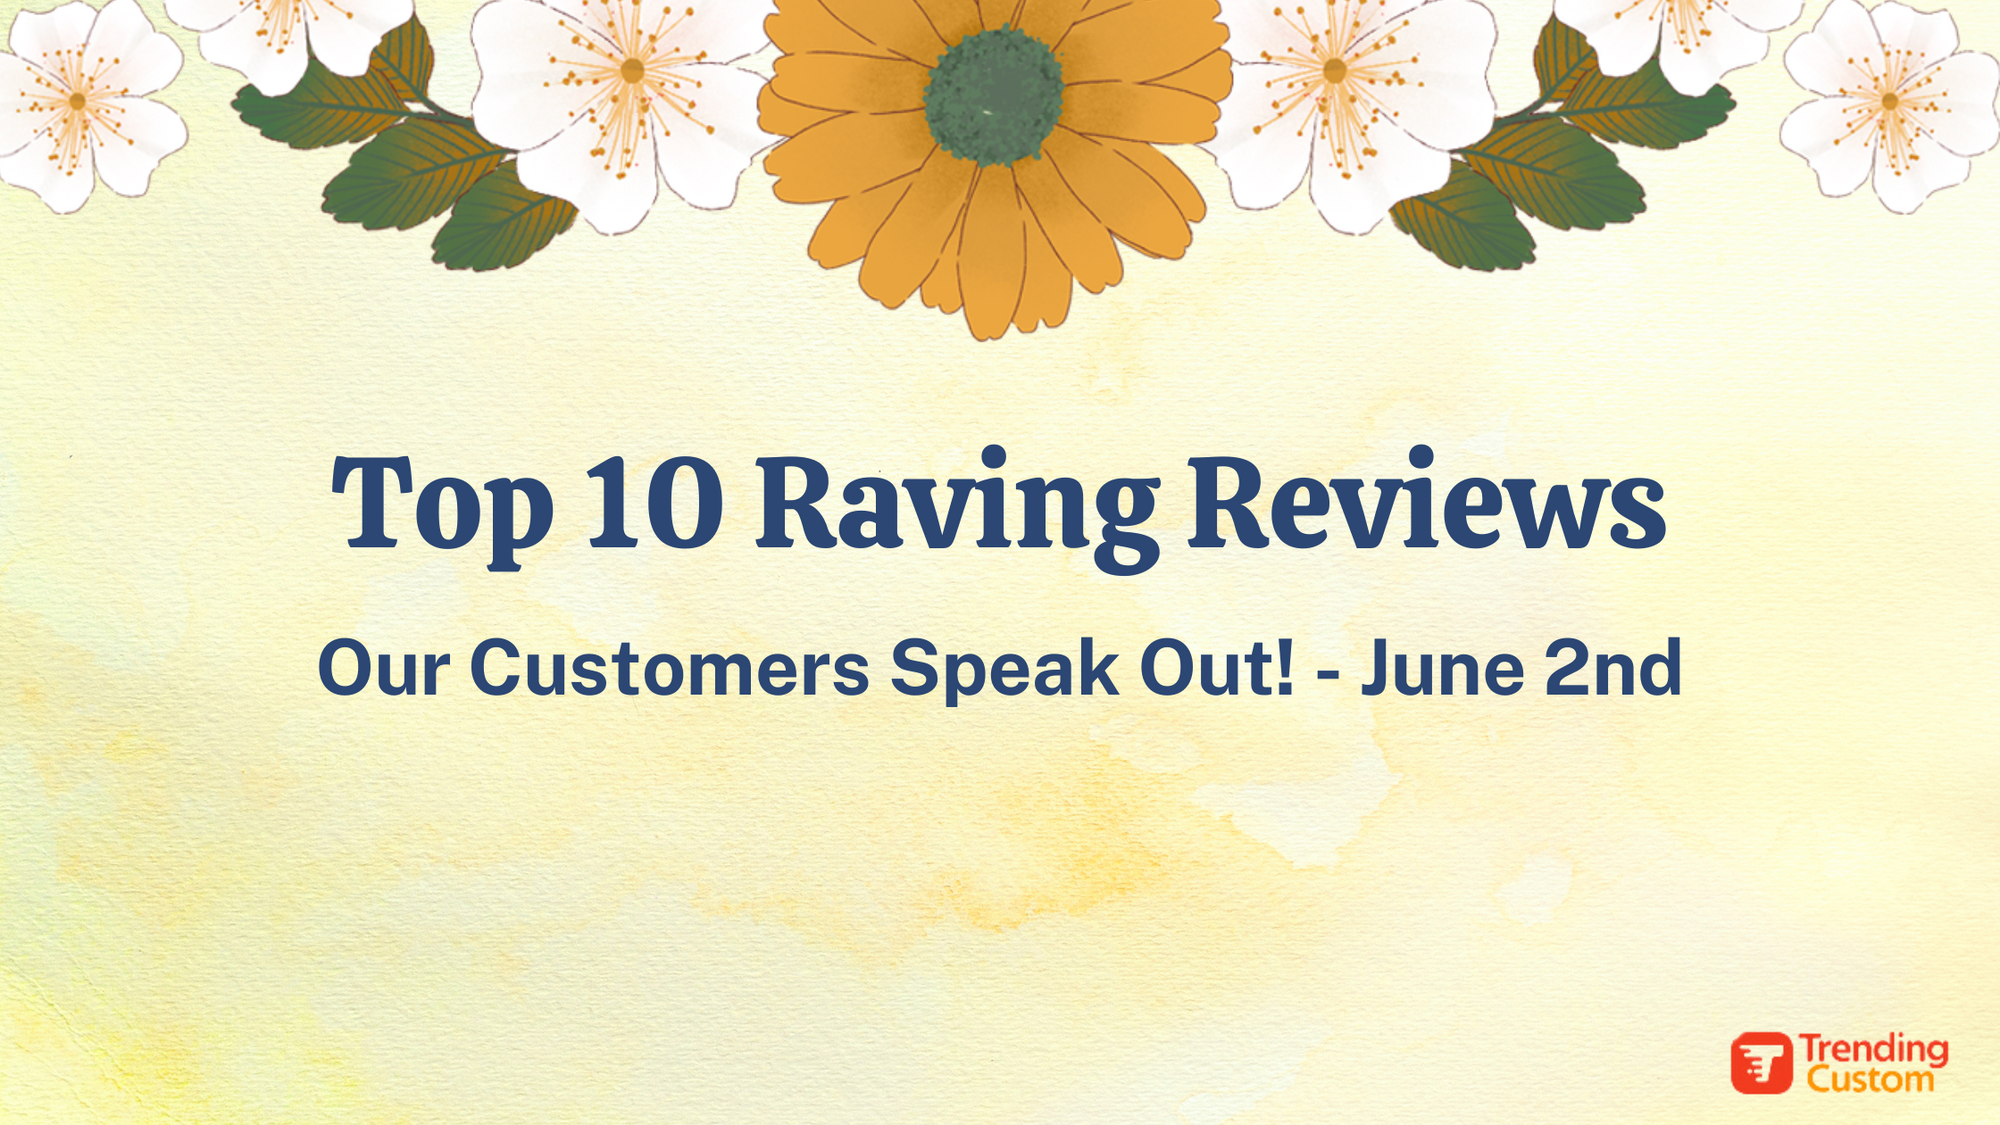 Top 10 Raving Reviews: Our Customers Speak Out! - June 2nd